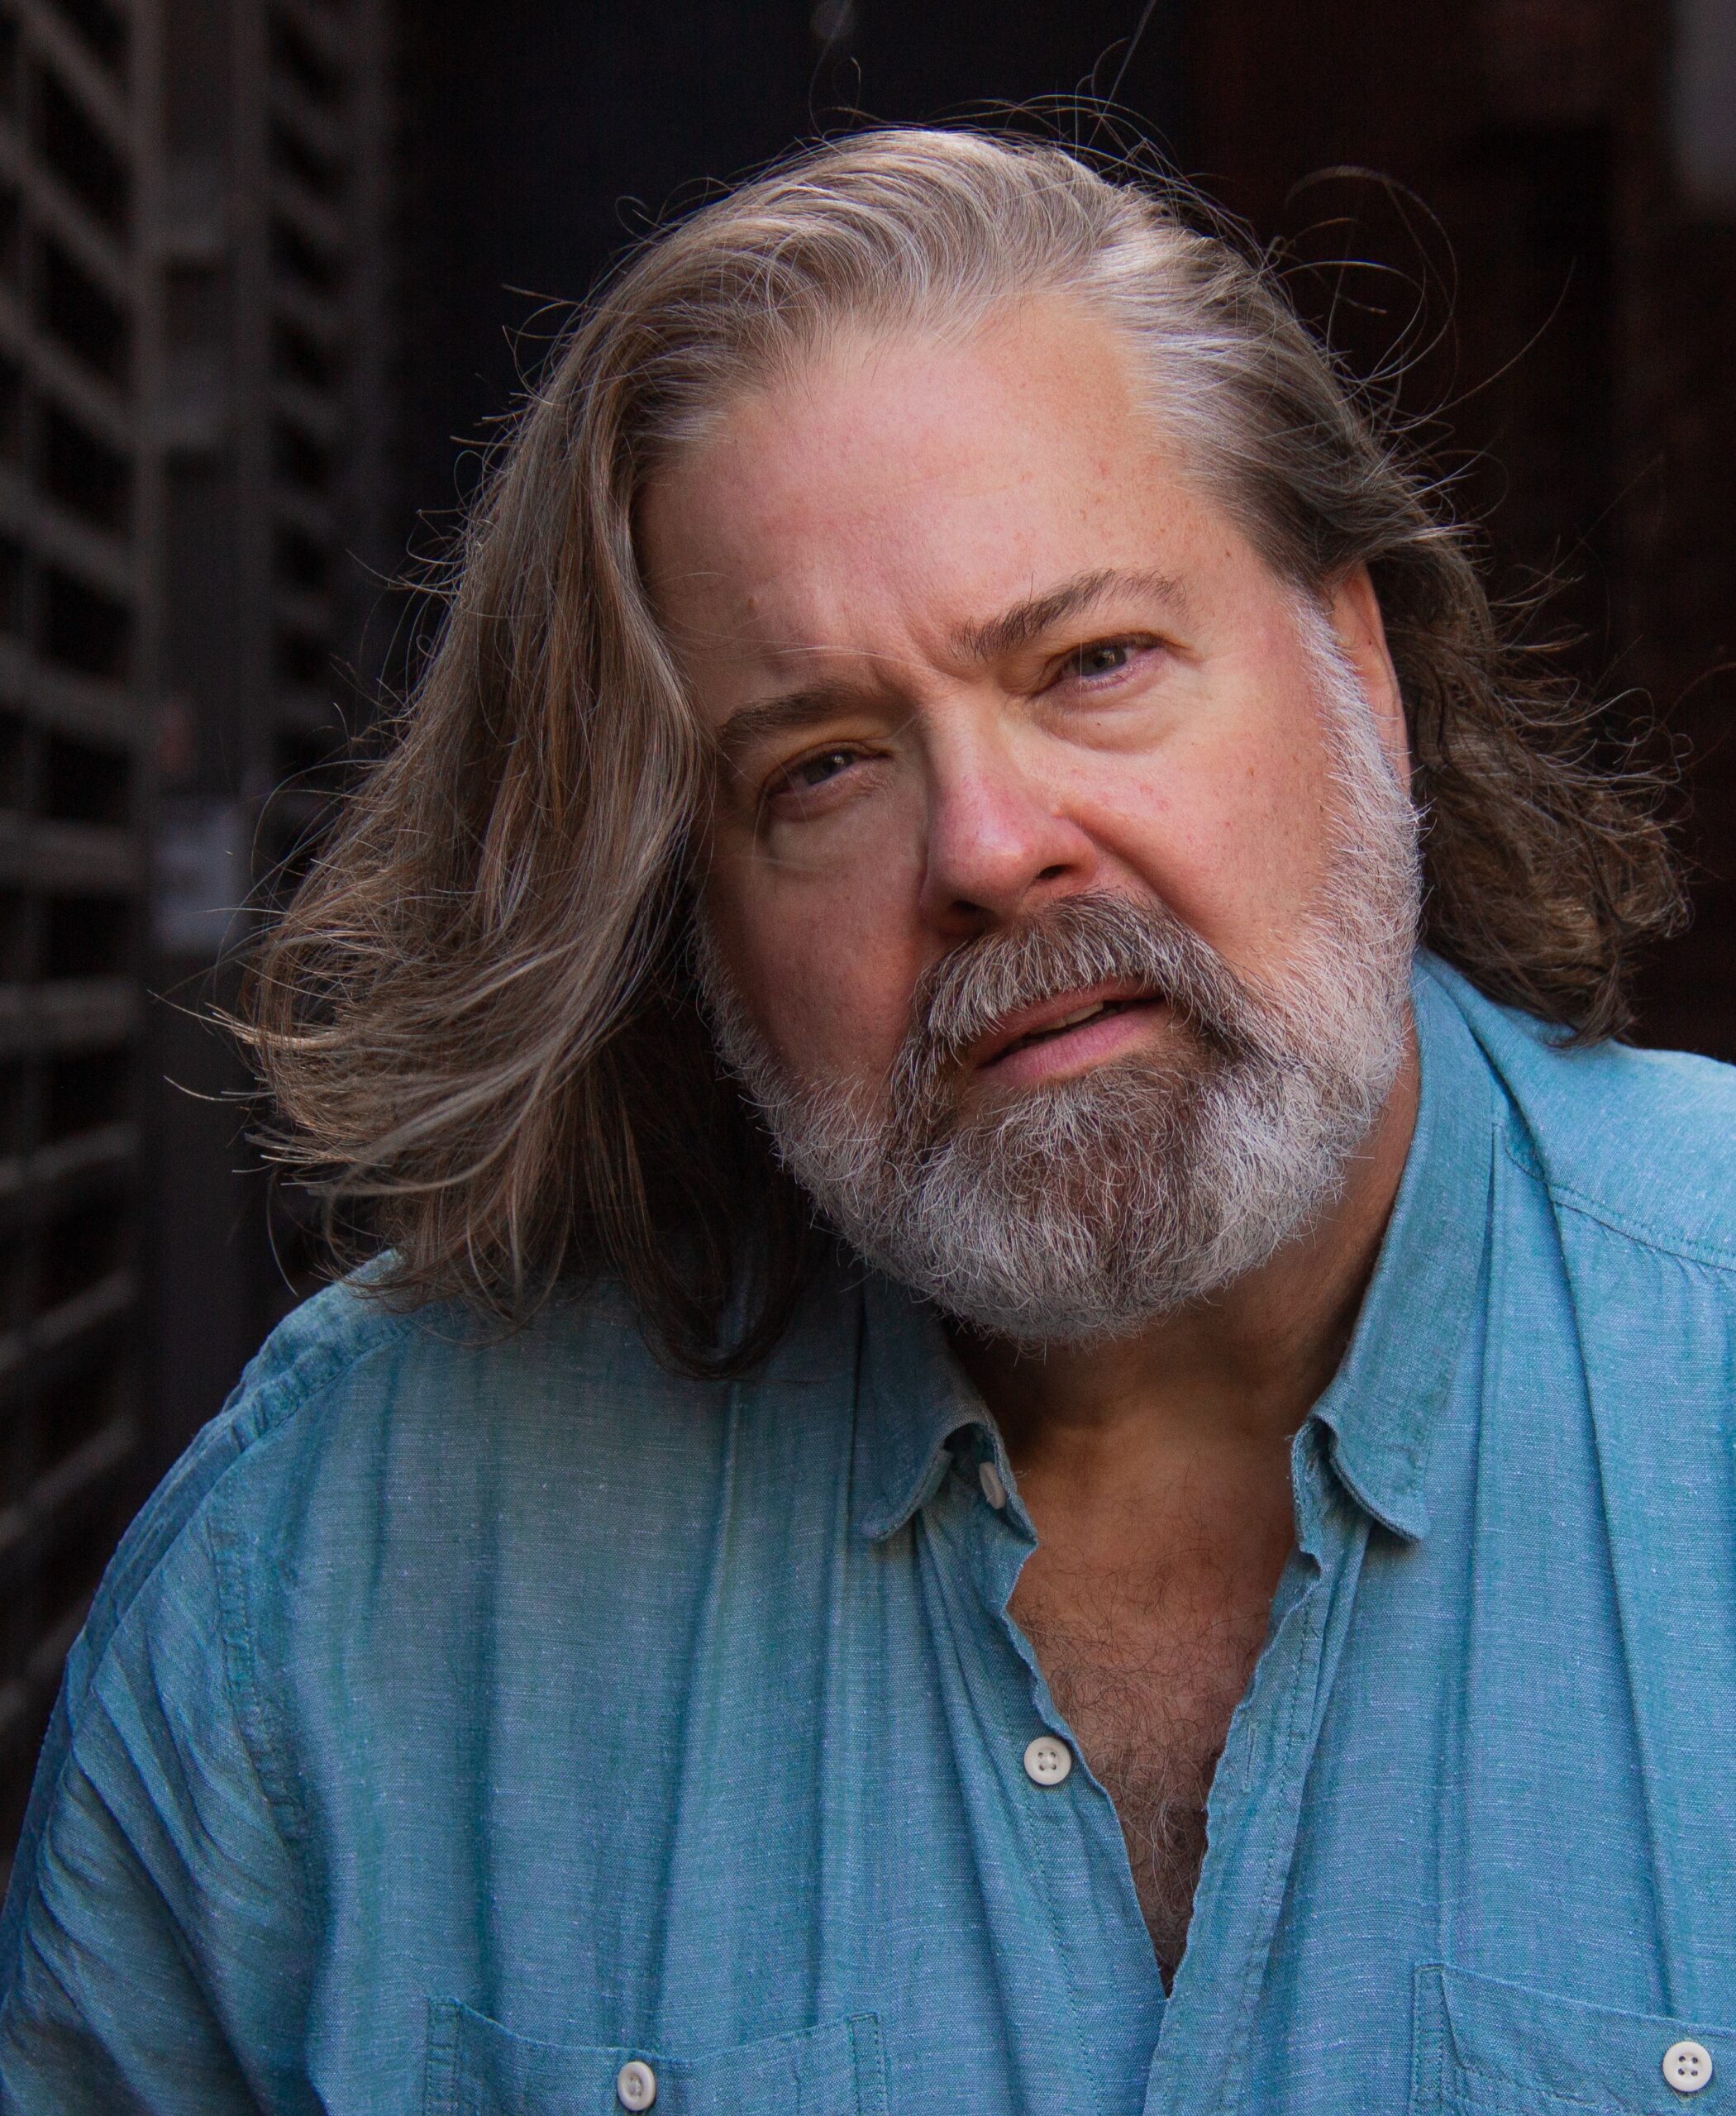 Headshot image of Bruce Dow. Bruce is wearing a blue collared shirt and has shoulder length grey hair and a grey beard.